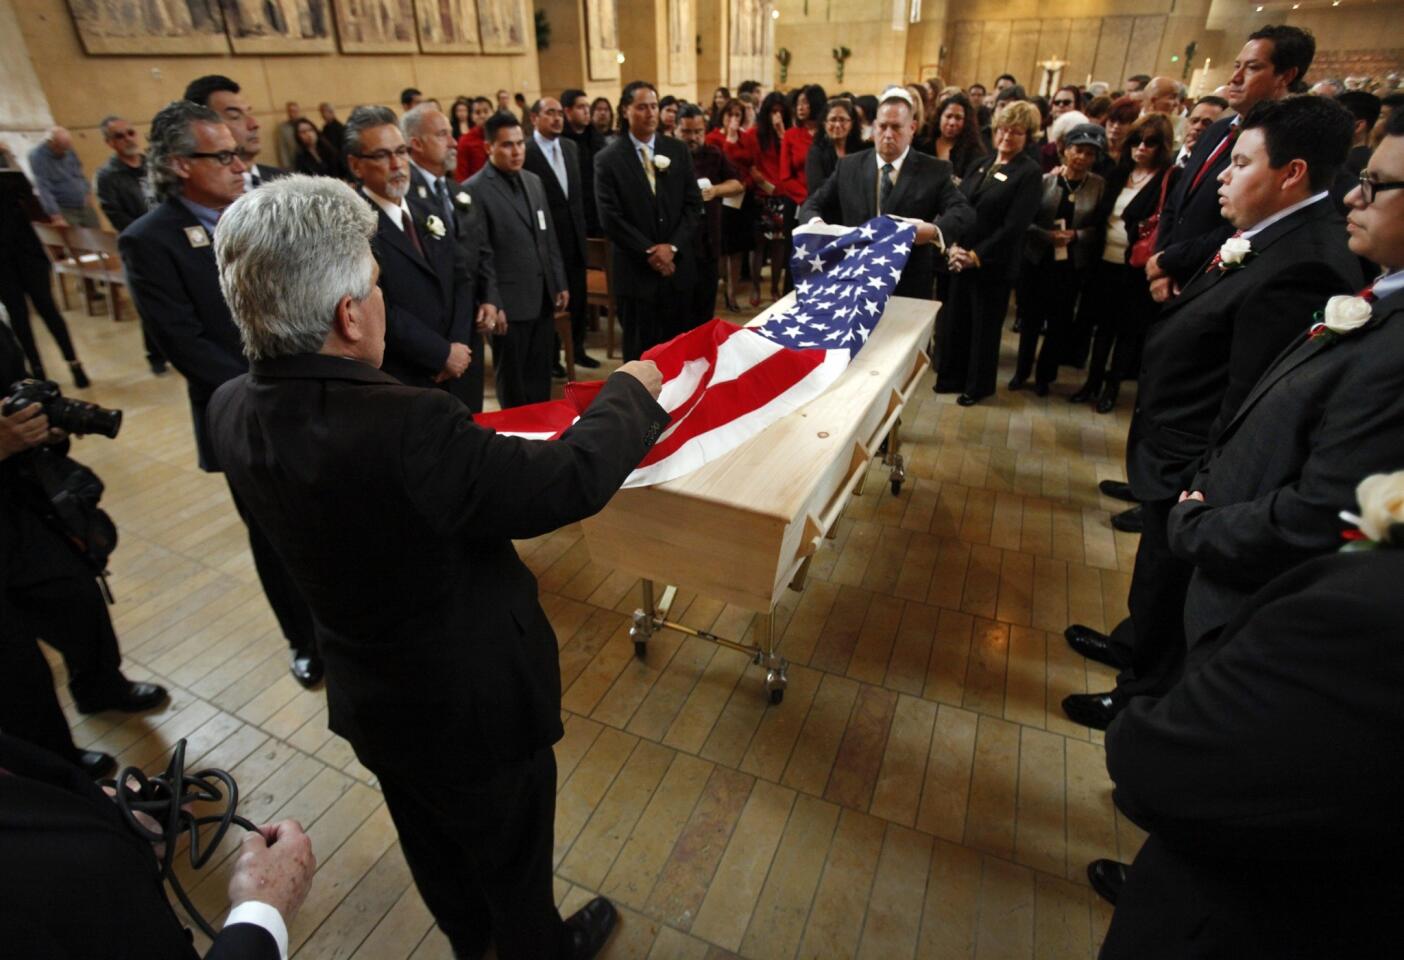 Relatives watch as the American flag is placed over the simple pine casket of teacher Sal Castro.